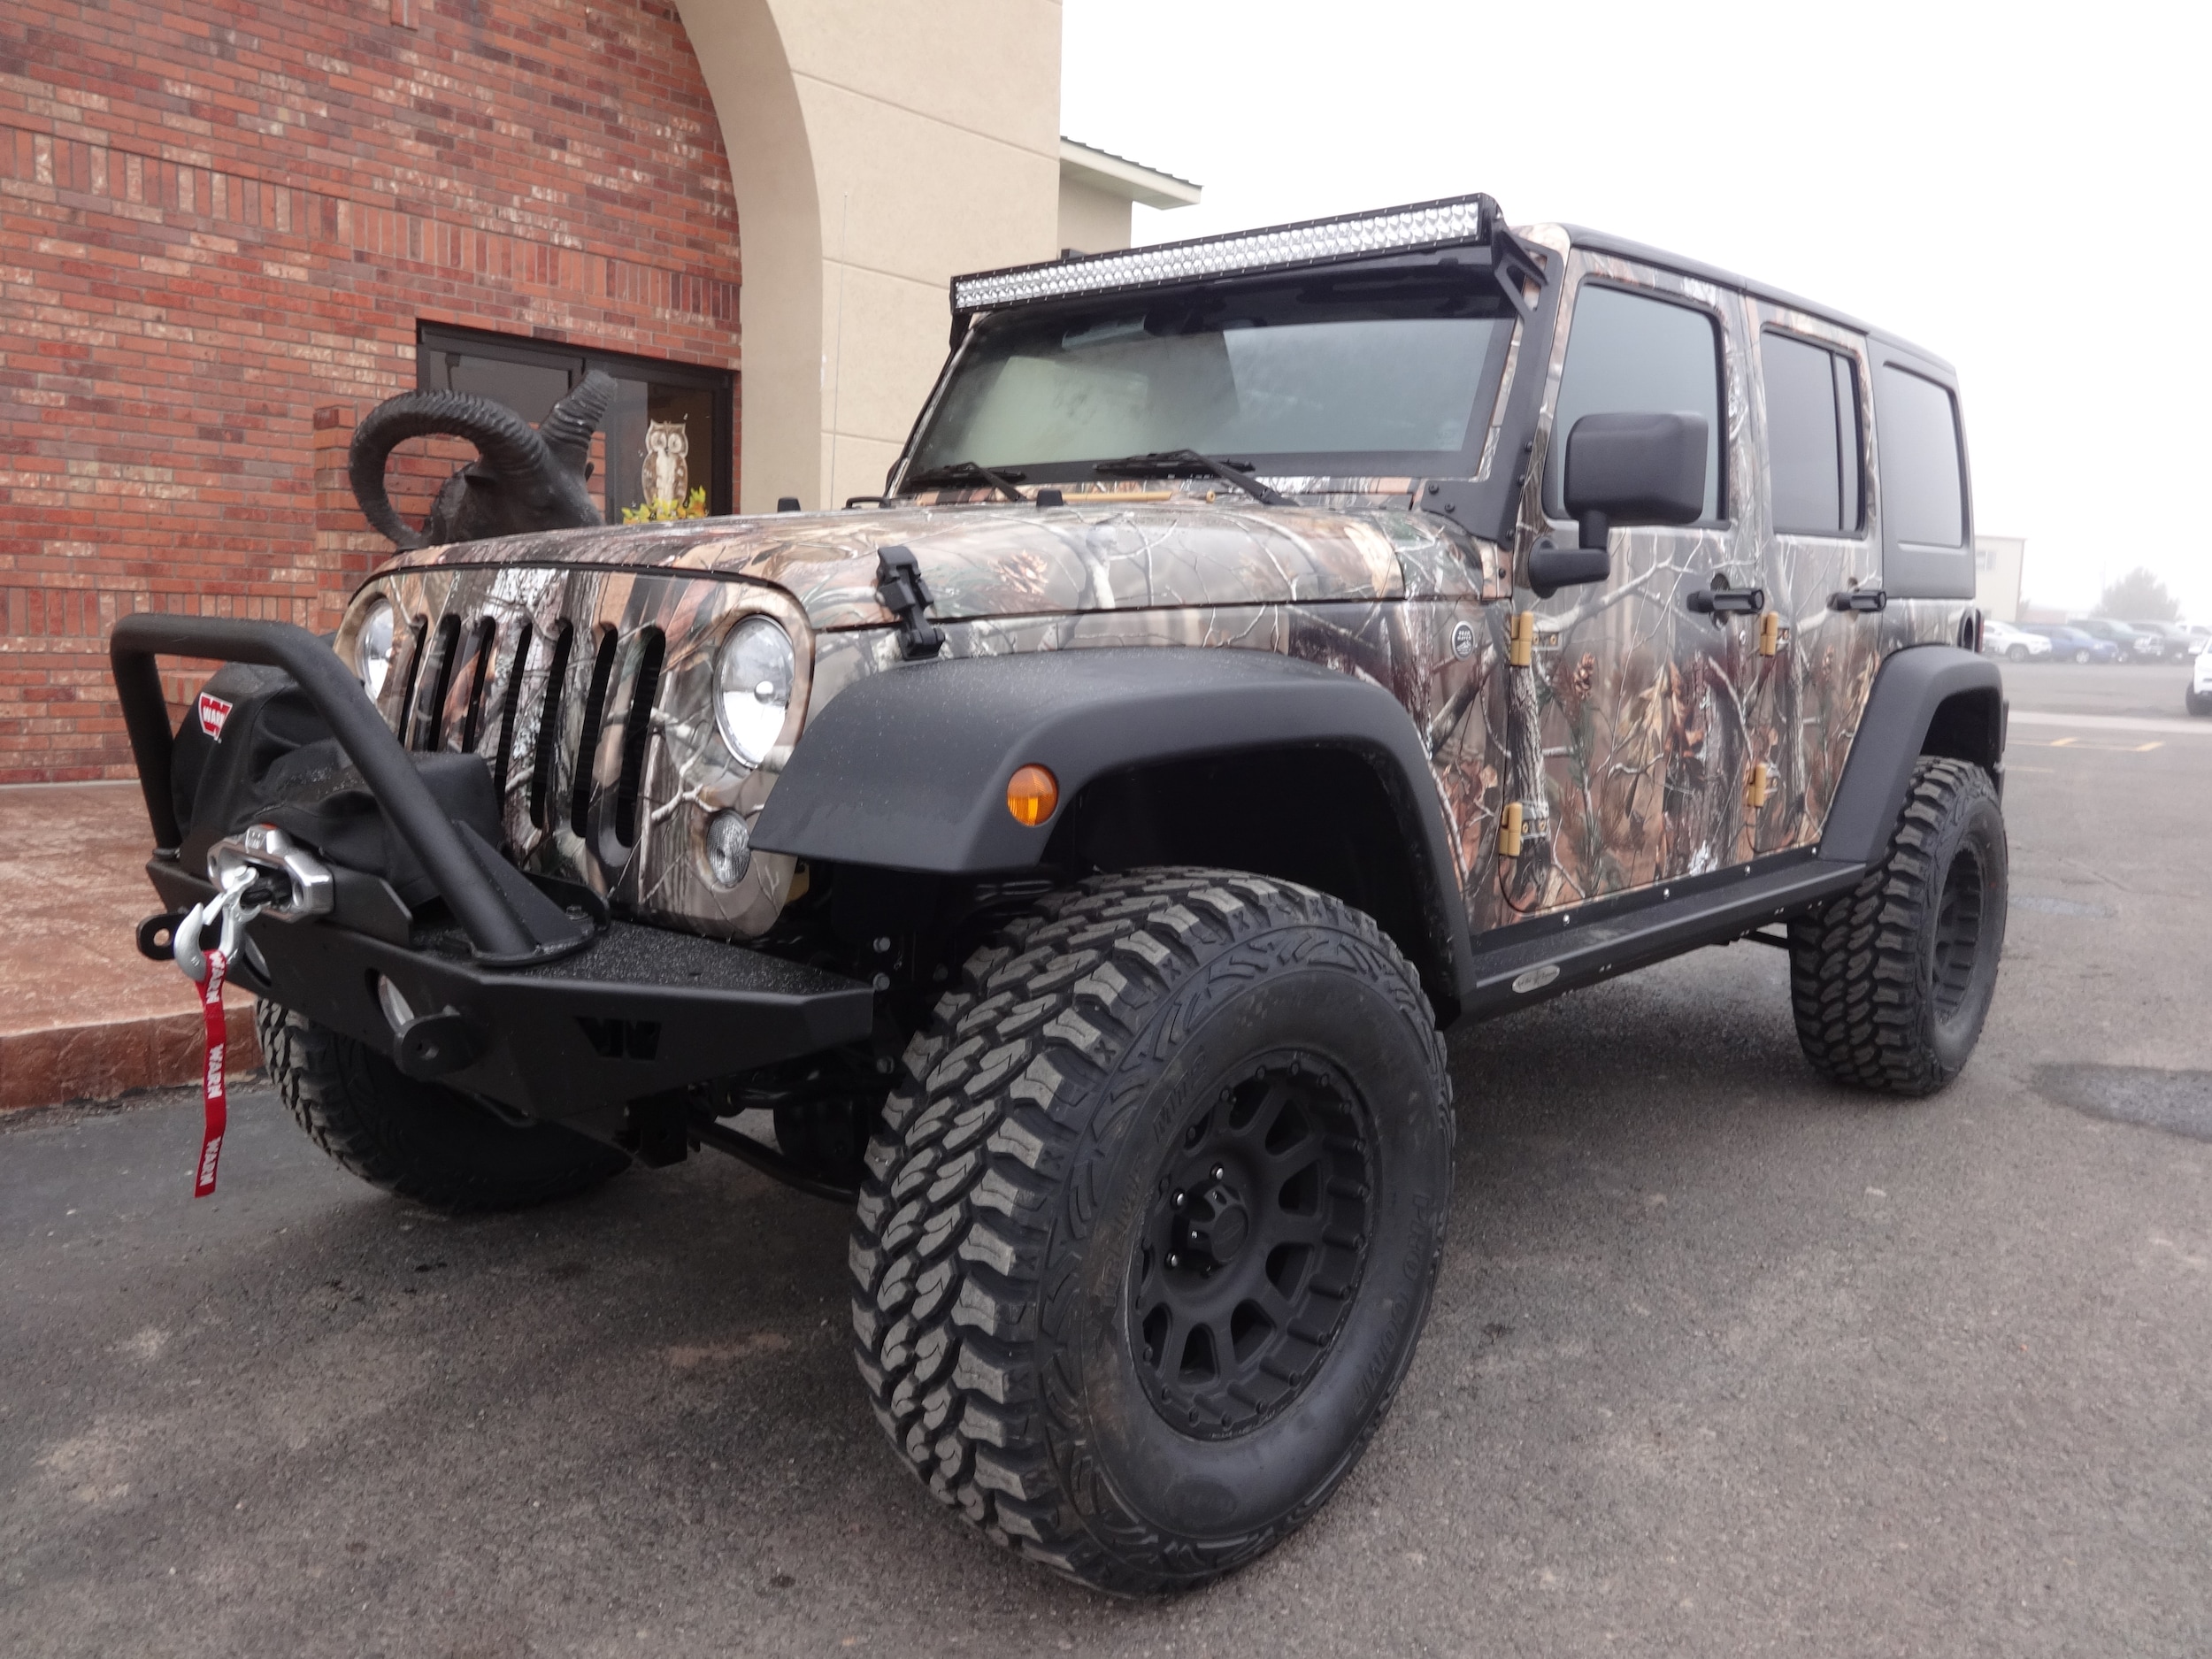 How do you build your own custom Jeep?